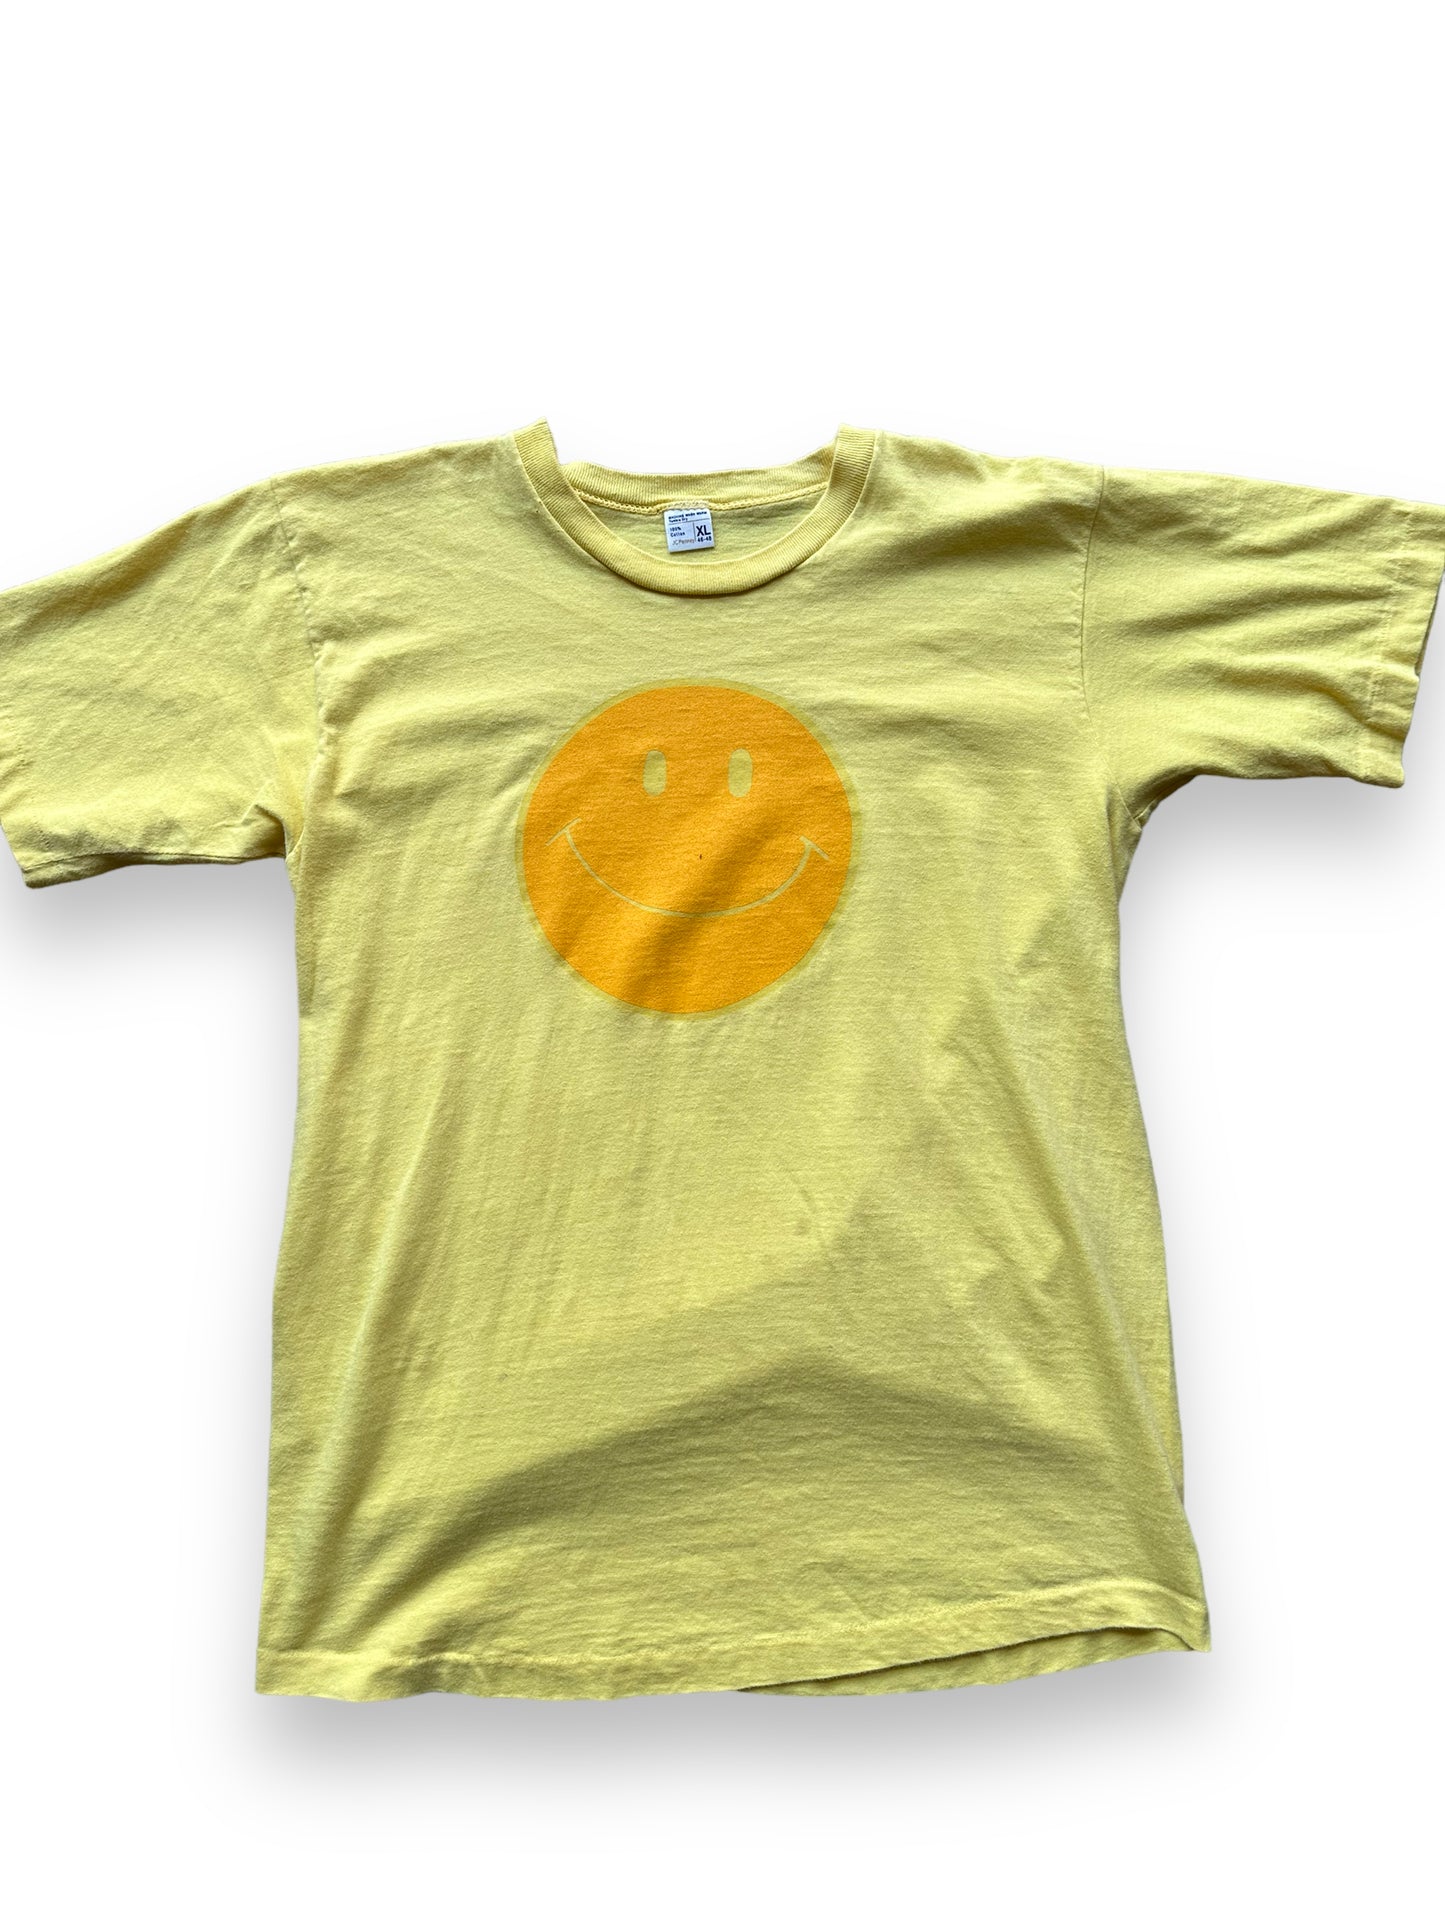 Front close up of Vintage 70's Smiley Face Tee SZ XL |  Vintage Art Tee Seattle | Barn Owl Vintage